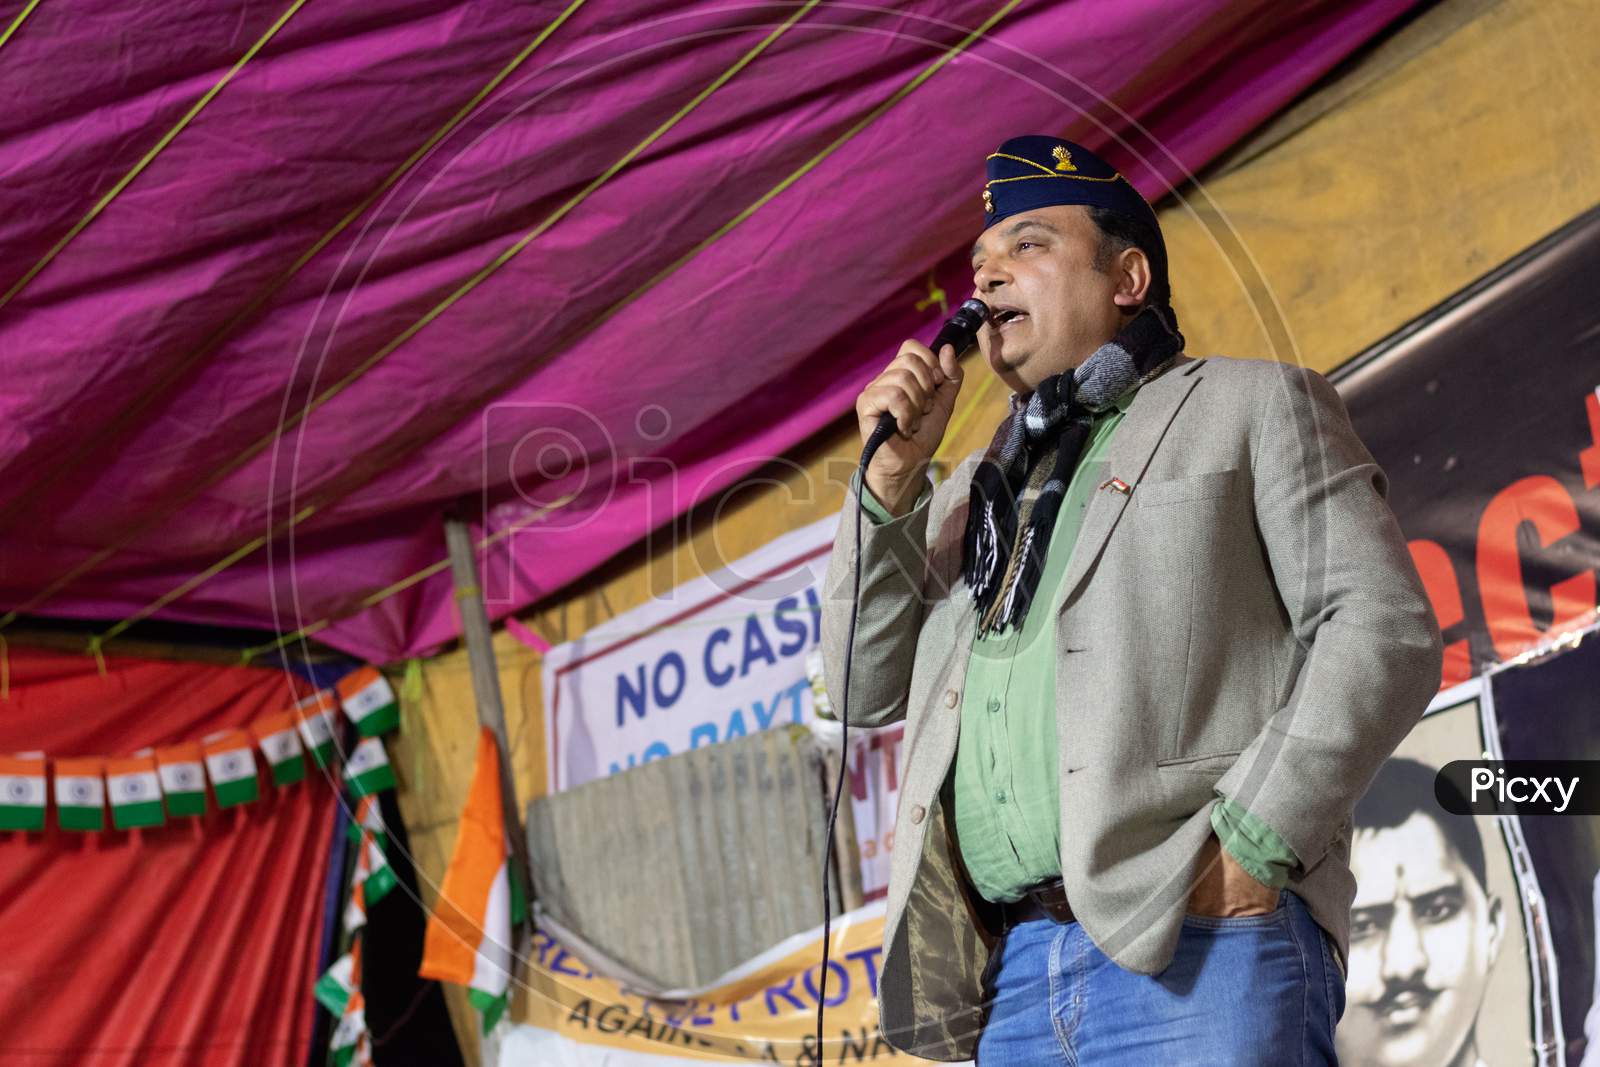 A man speaking on stage at shaheen Bagh during protest against Citizenship Amendment Act CAA, National Register Of Citizens NRC and National Population Register NPR